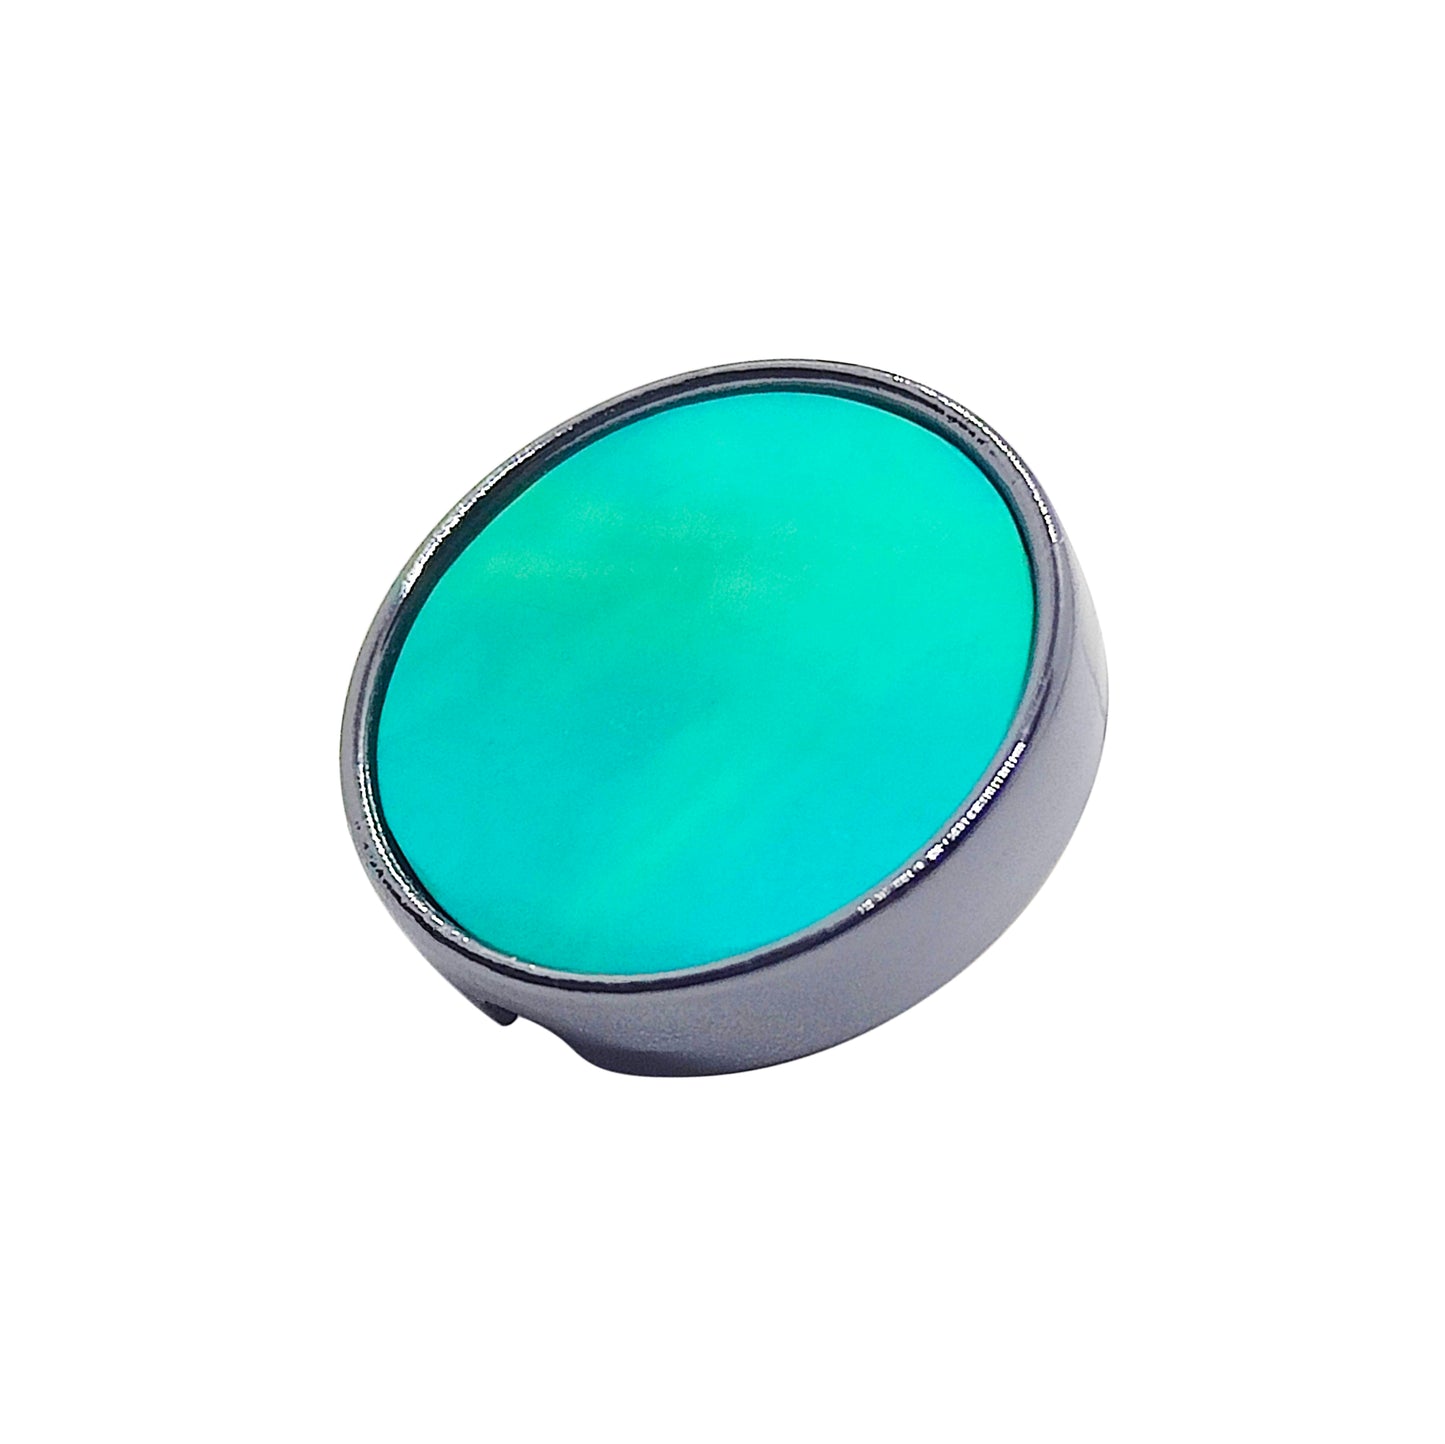 21mm button in brushed gold metal and Tibetan turquoise